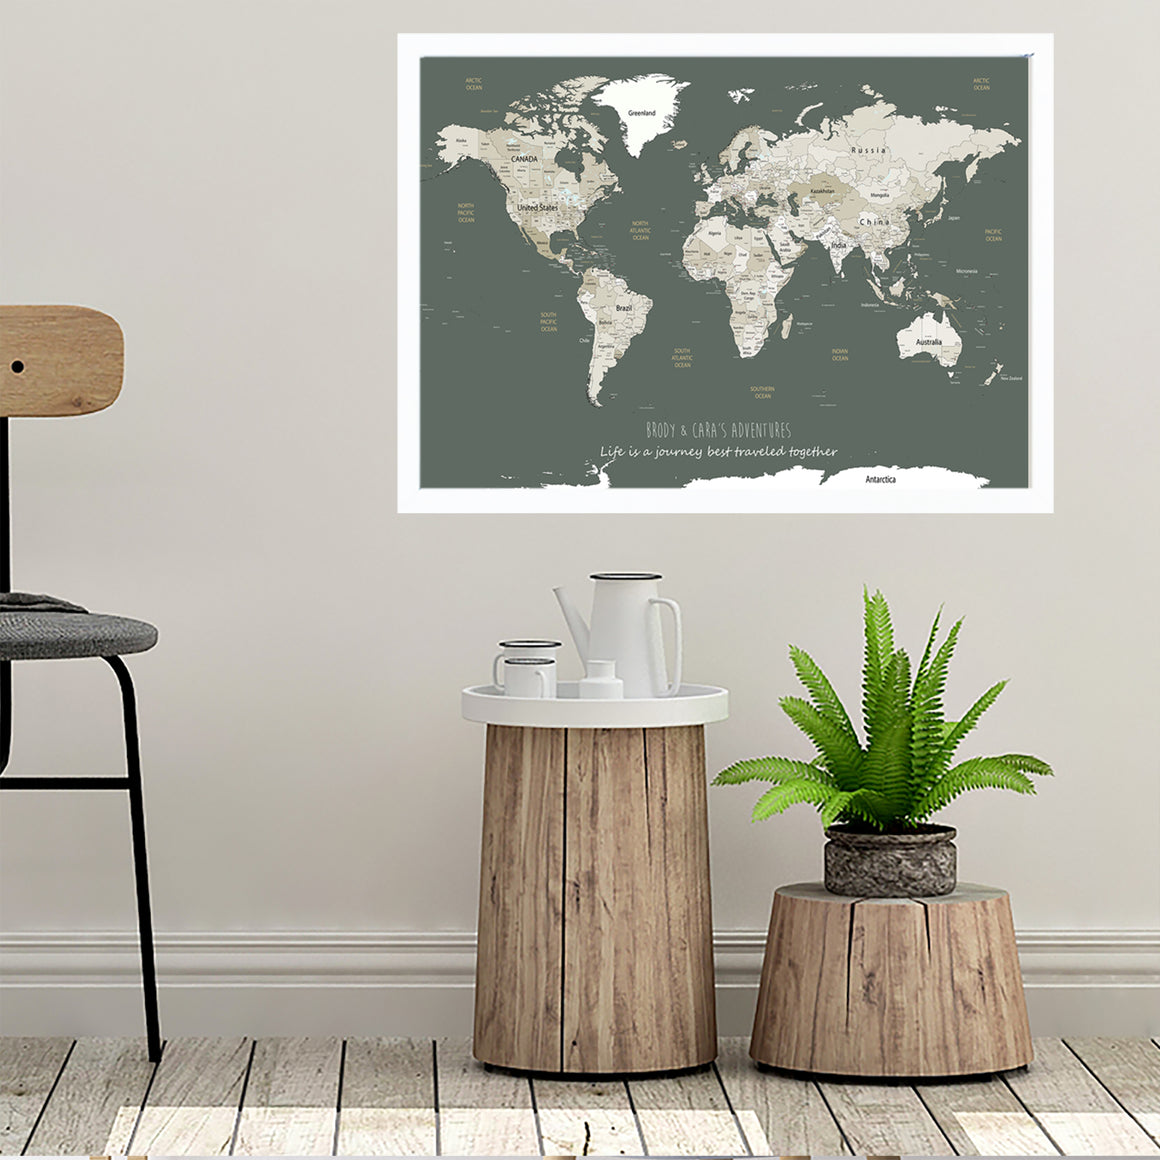 Personalised World Map Framed Pin Board Sage Green and Whites. Our World Map Pin Boards make for a great Housewarming Gift, Gift for Her, or Travel gift.  Personalised Map includes inspirational travel quote and family details.